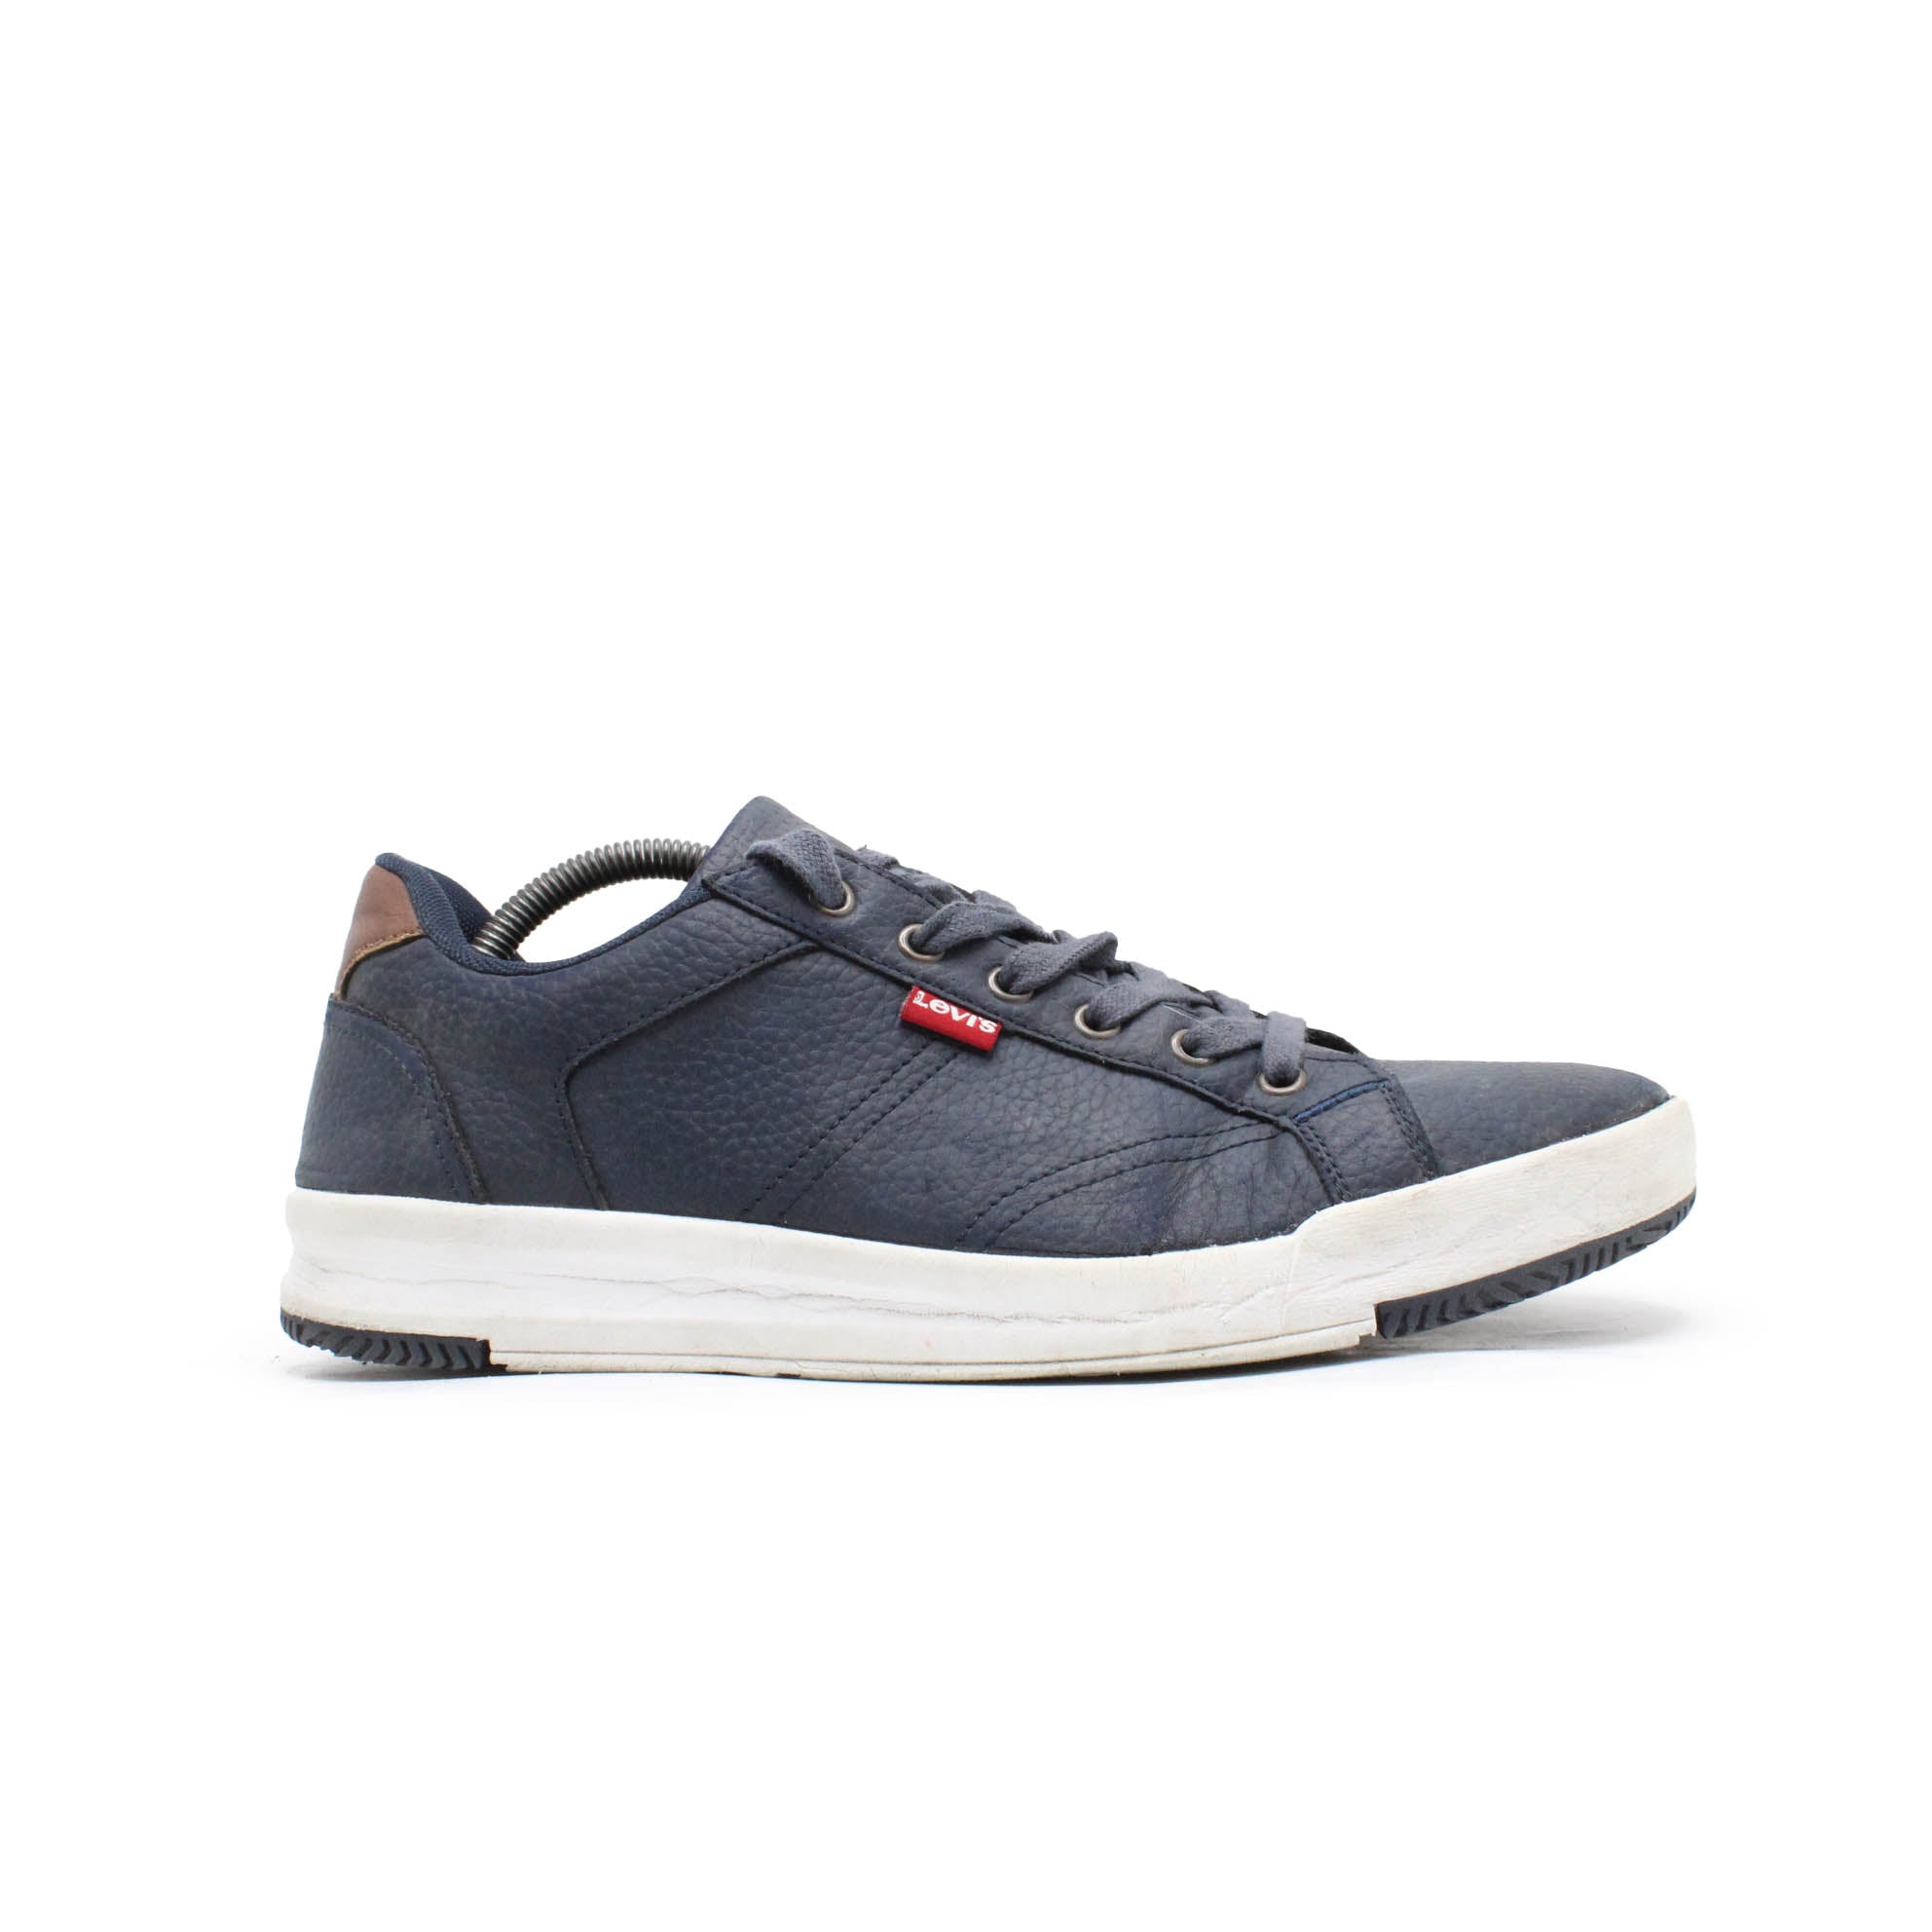 Levis Shoes, Clothing & Accessories